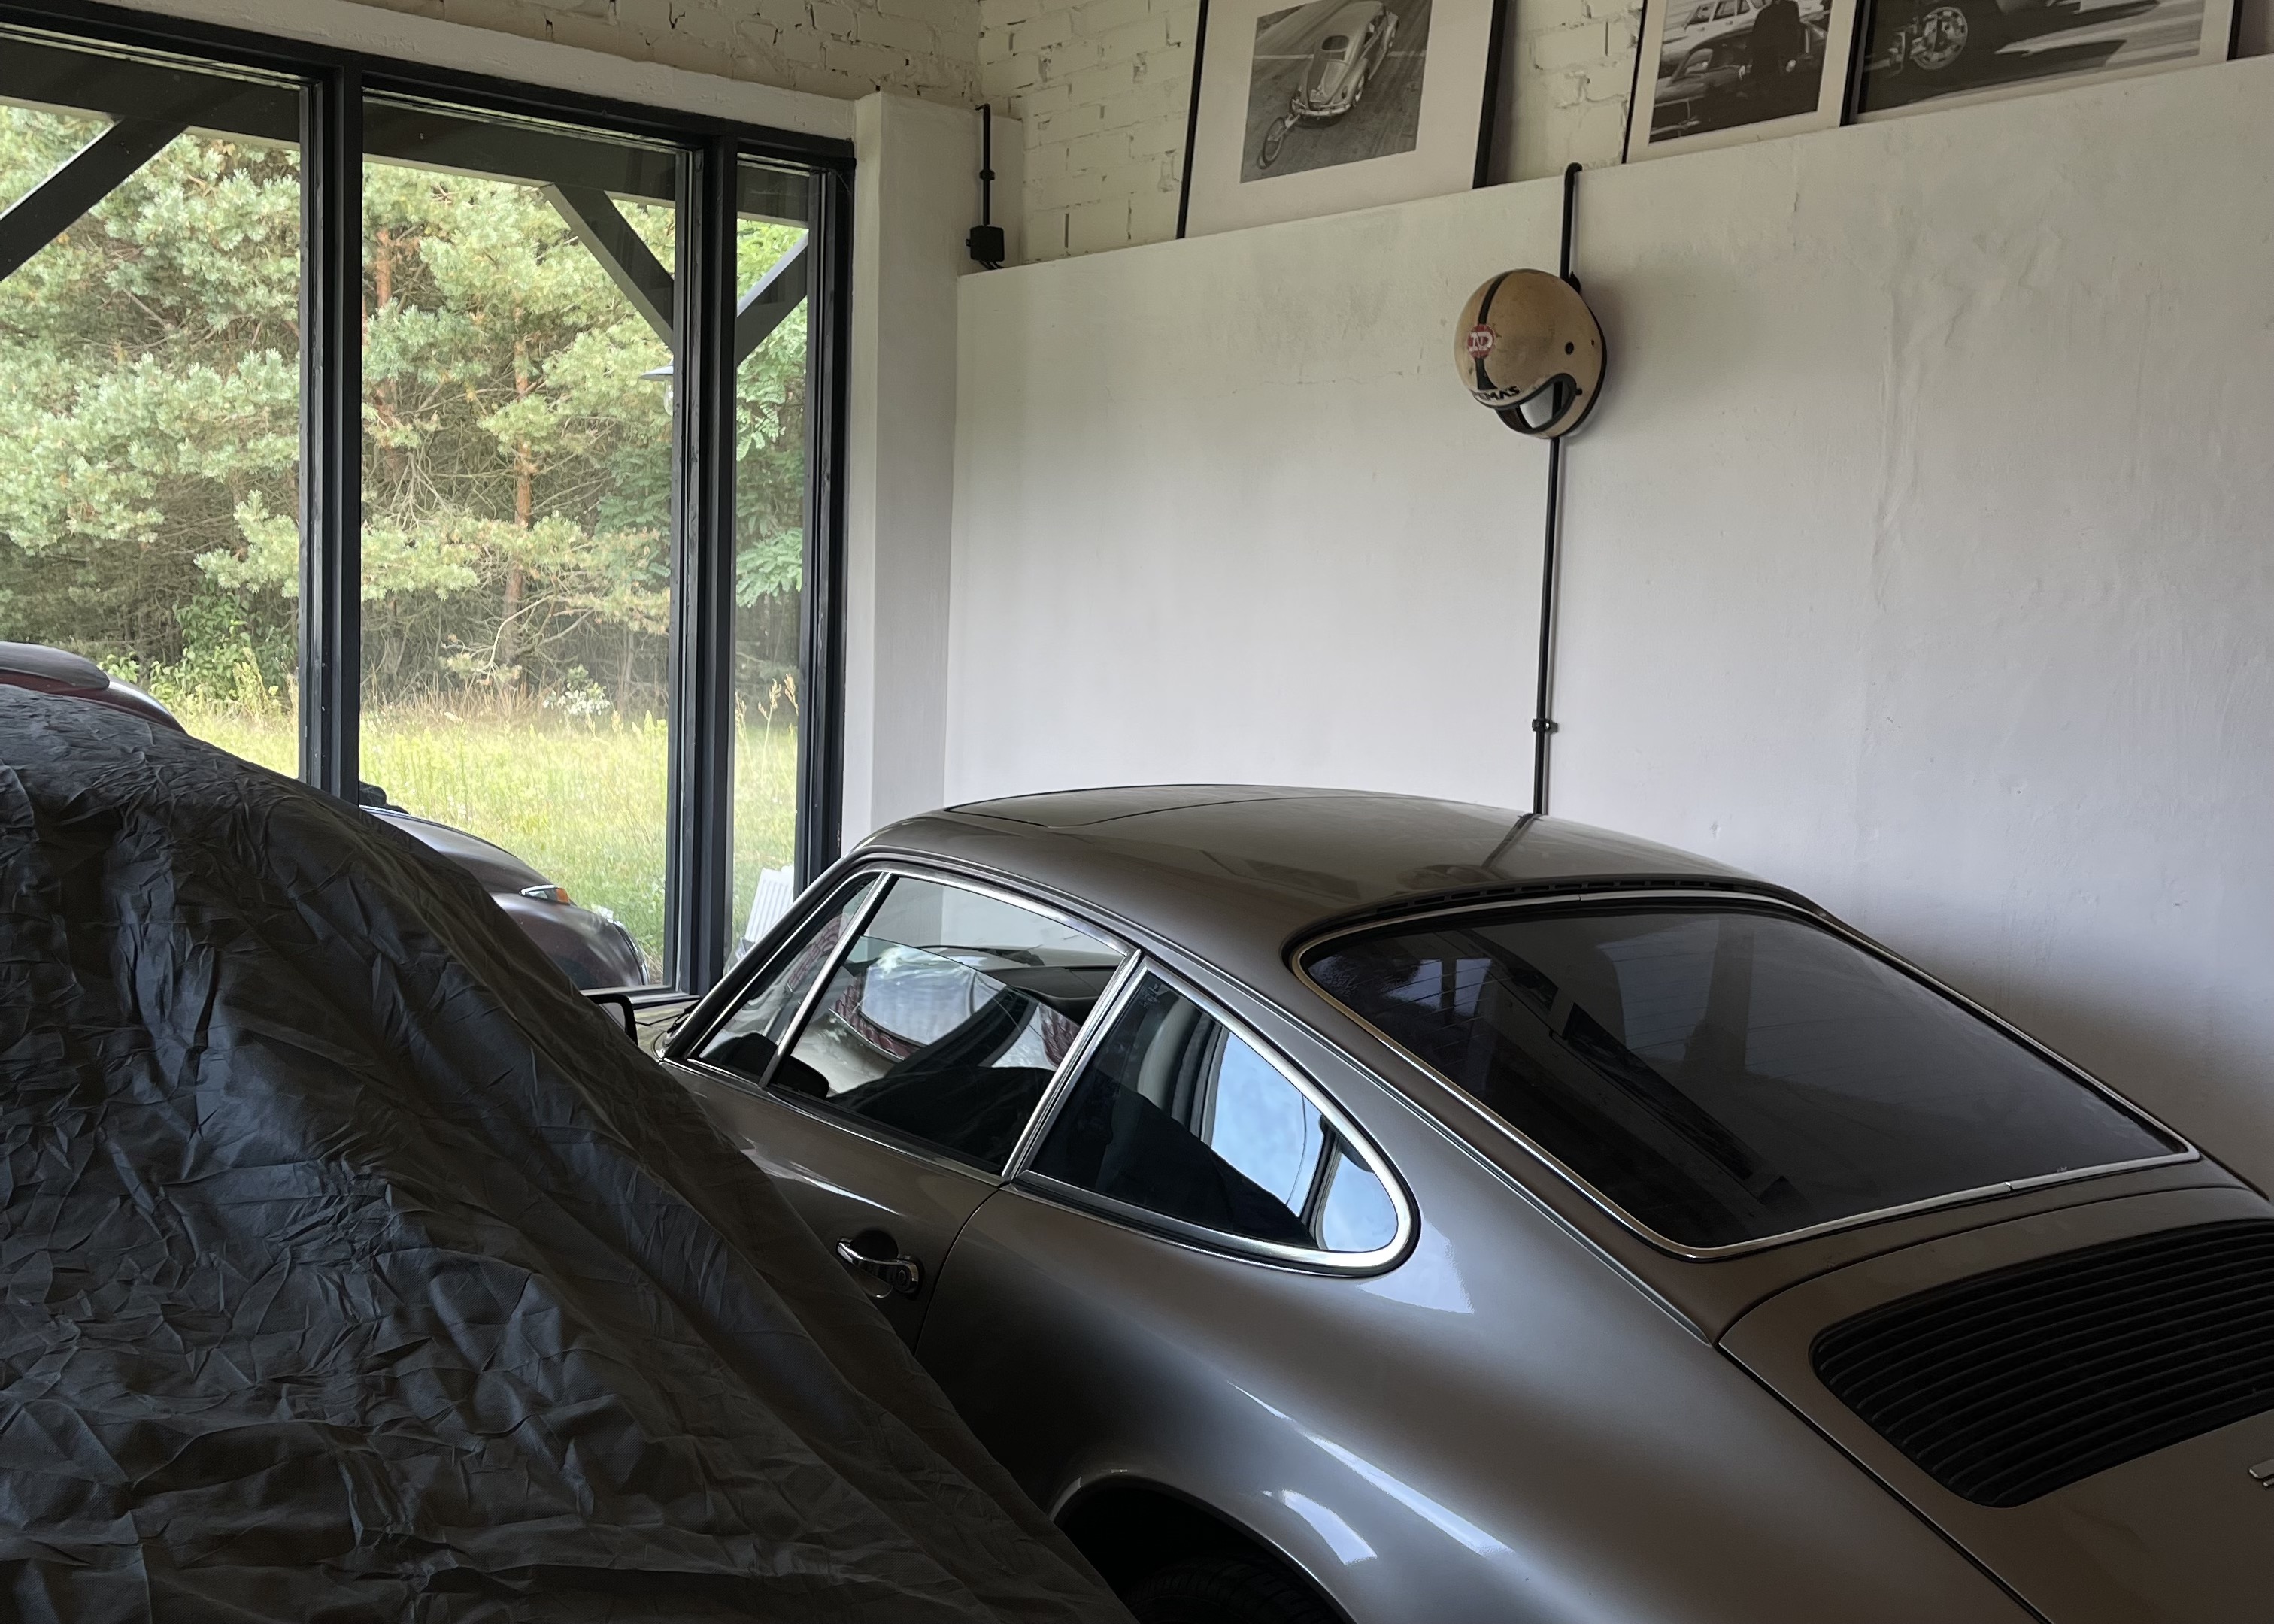 View of Porsche 911 S (G-model) from side and rear, parked in garage